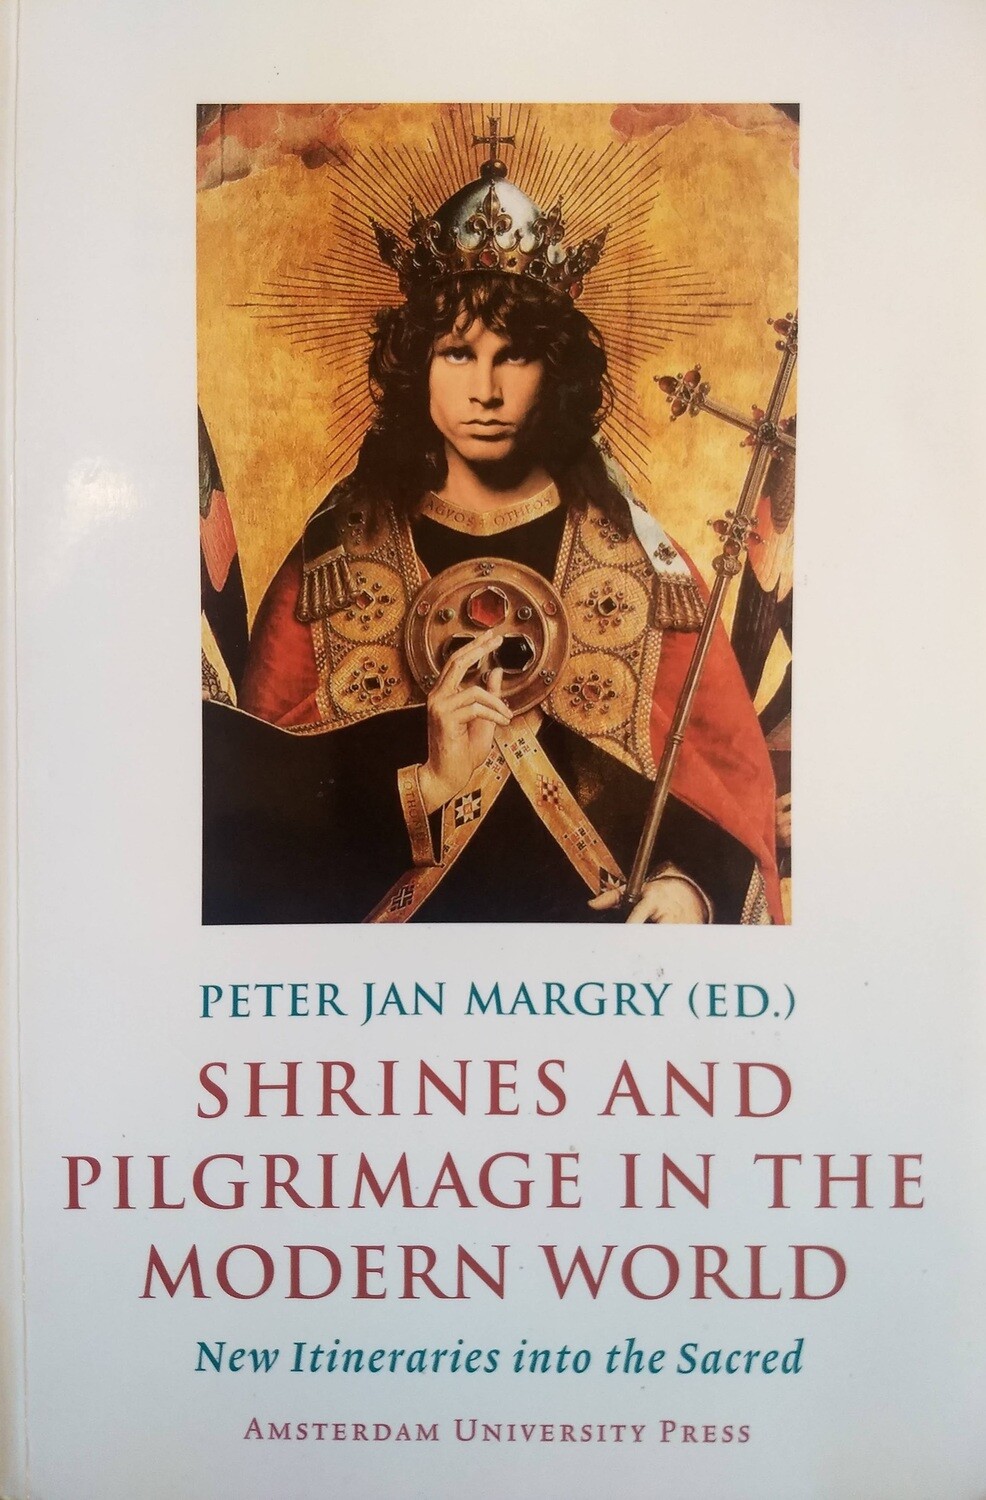 Shrines and pilgrimage in the modern world